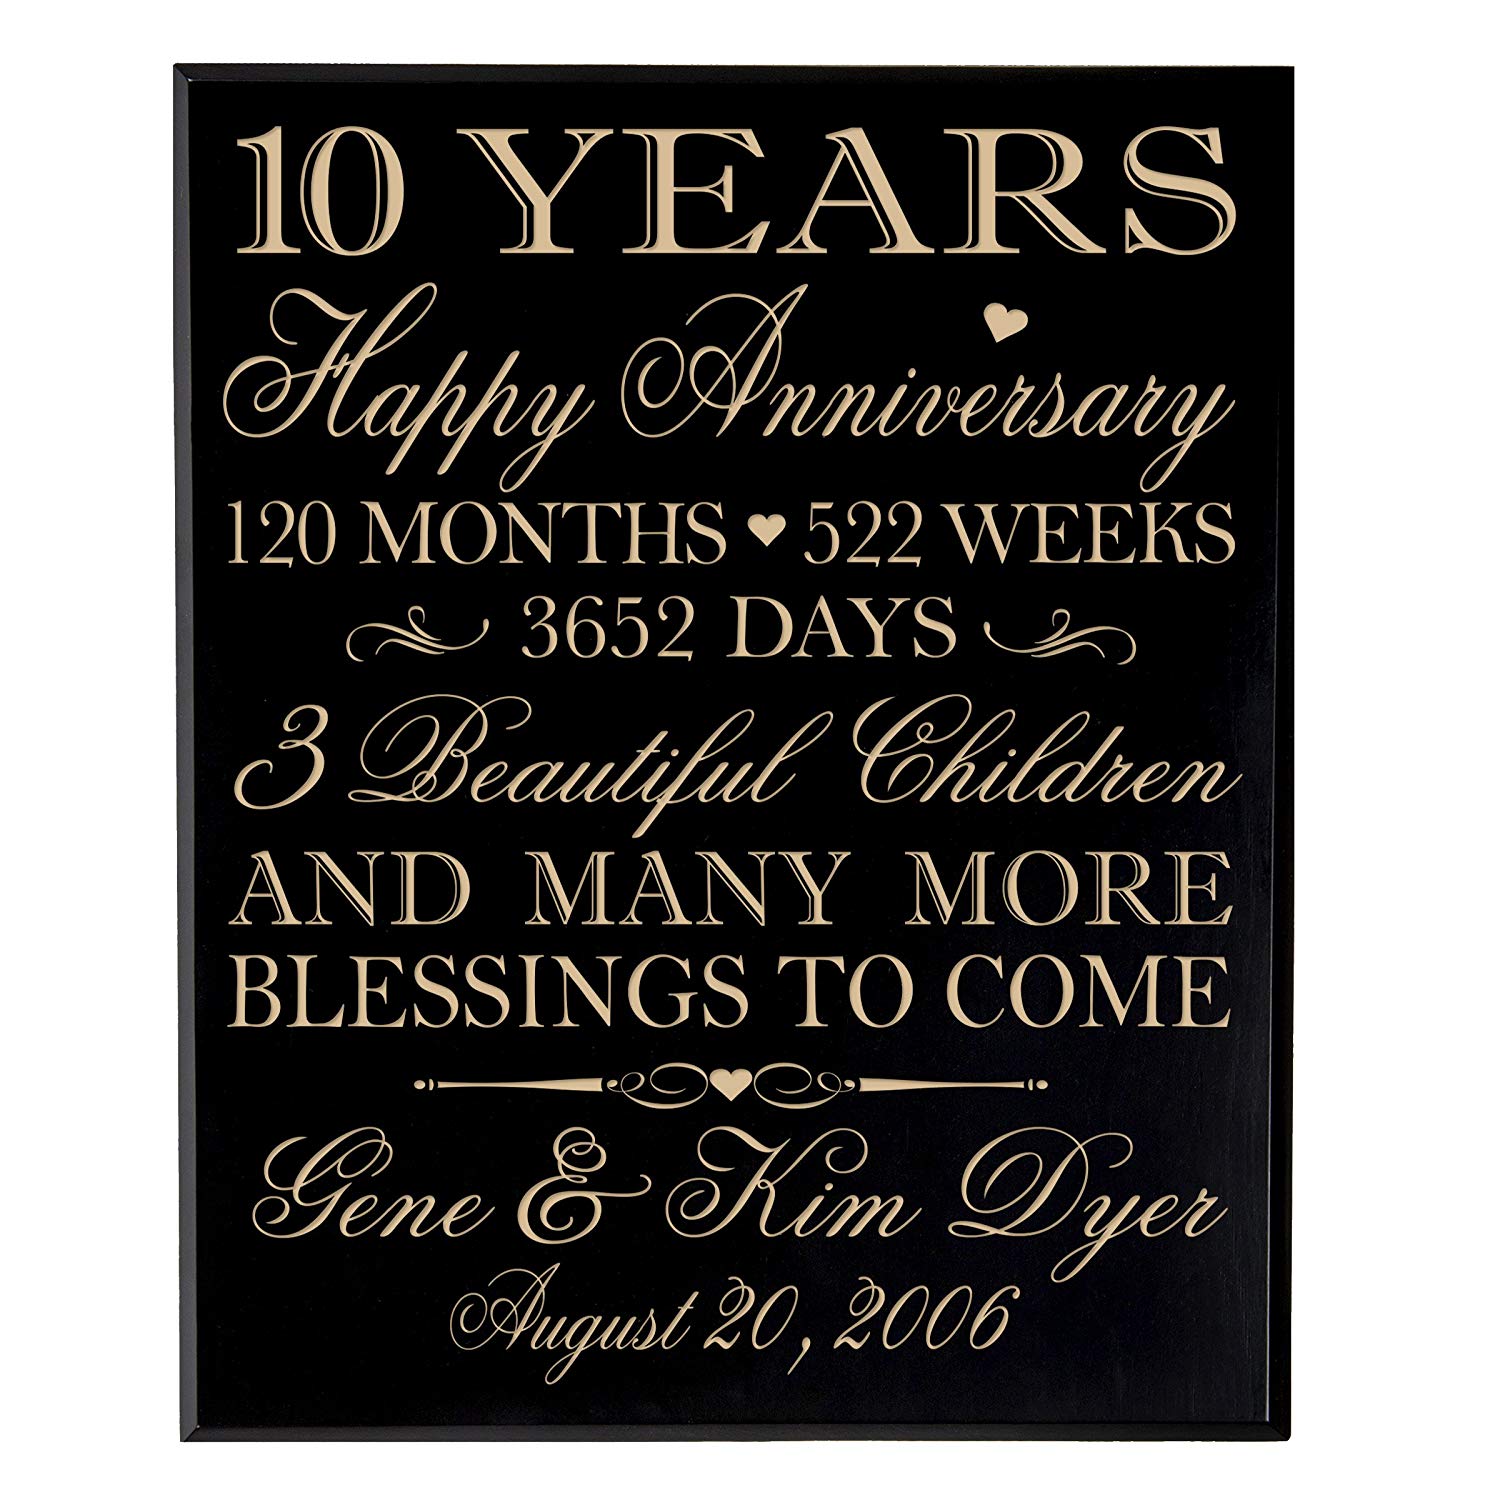 Personalized 10th Anniversary Wall Plaque - Happy Anniversary - LifeSong Milestones